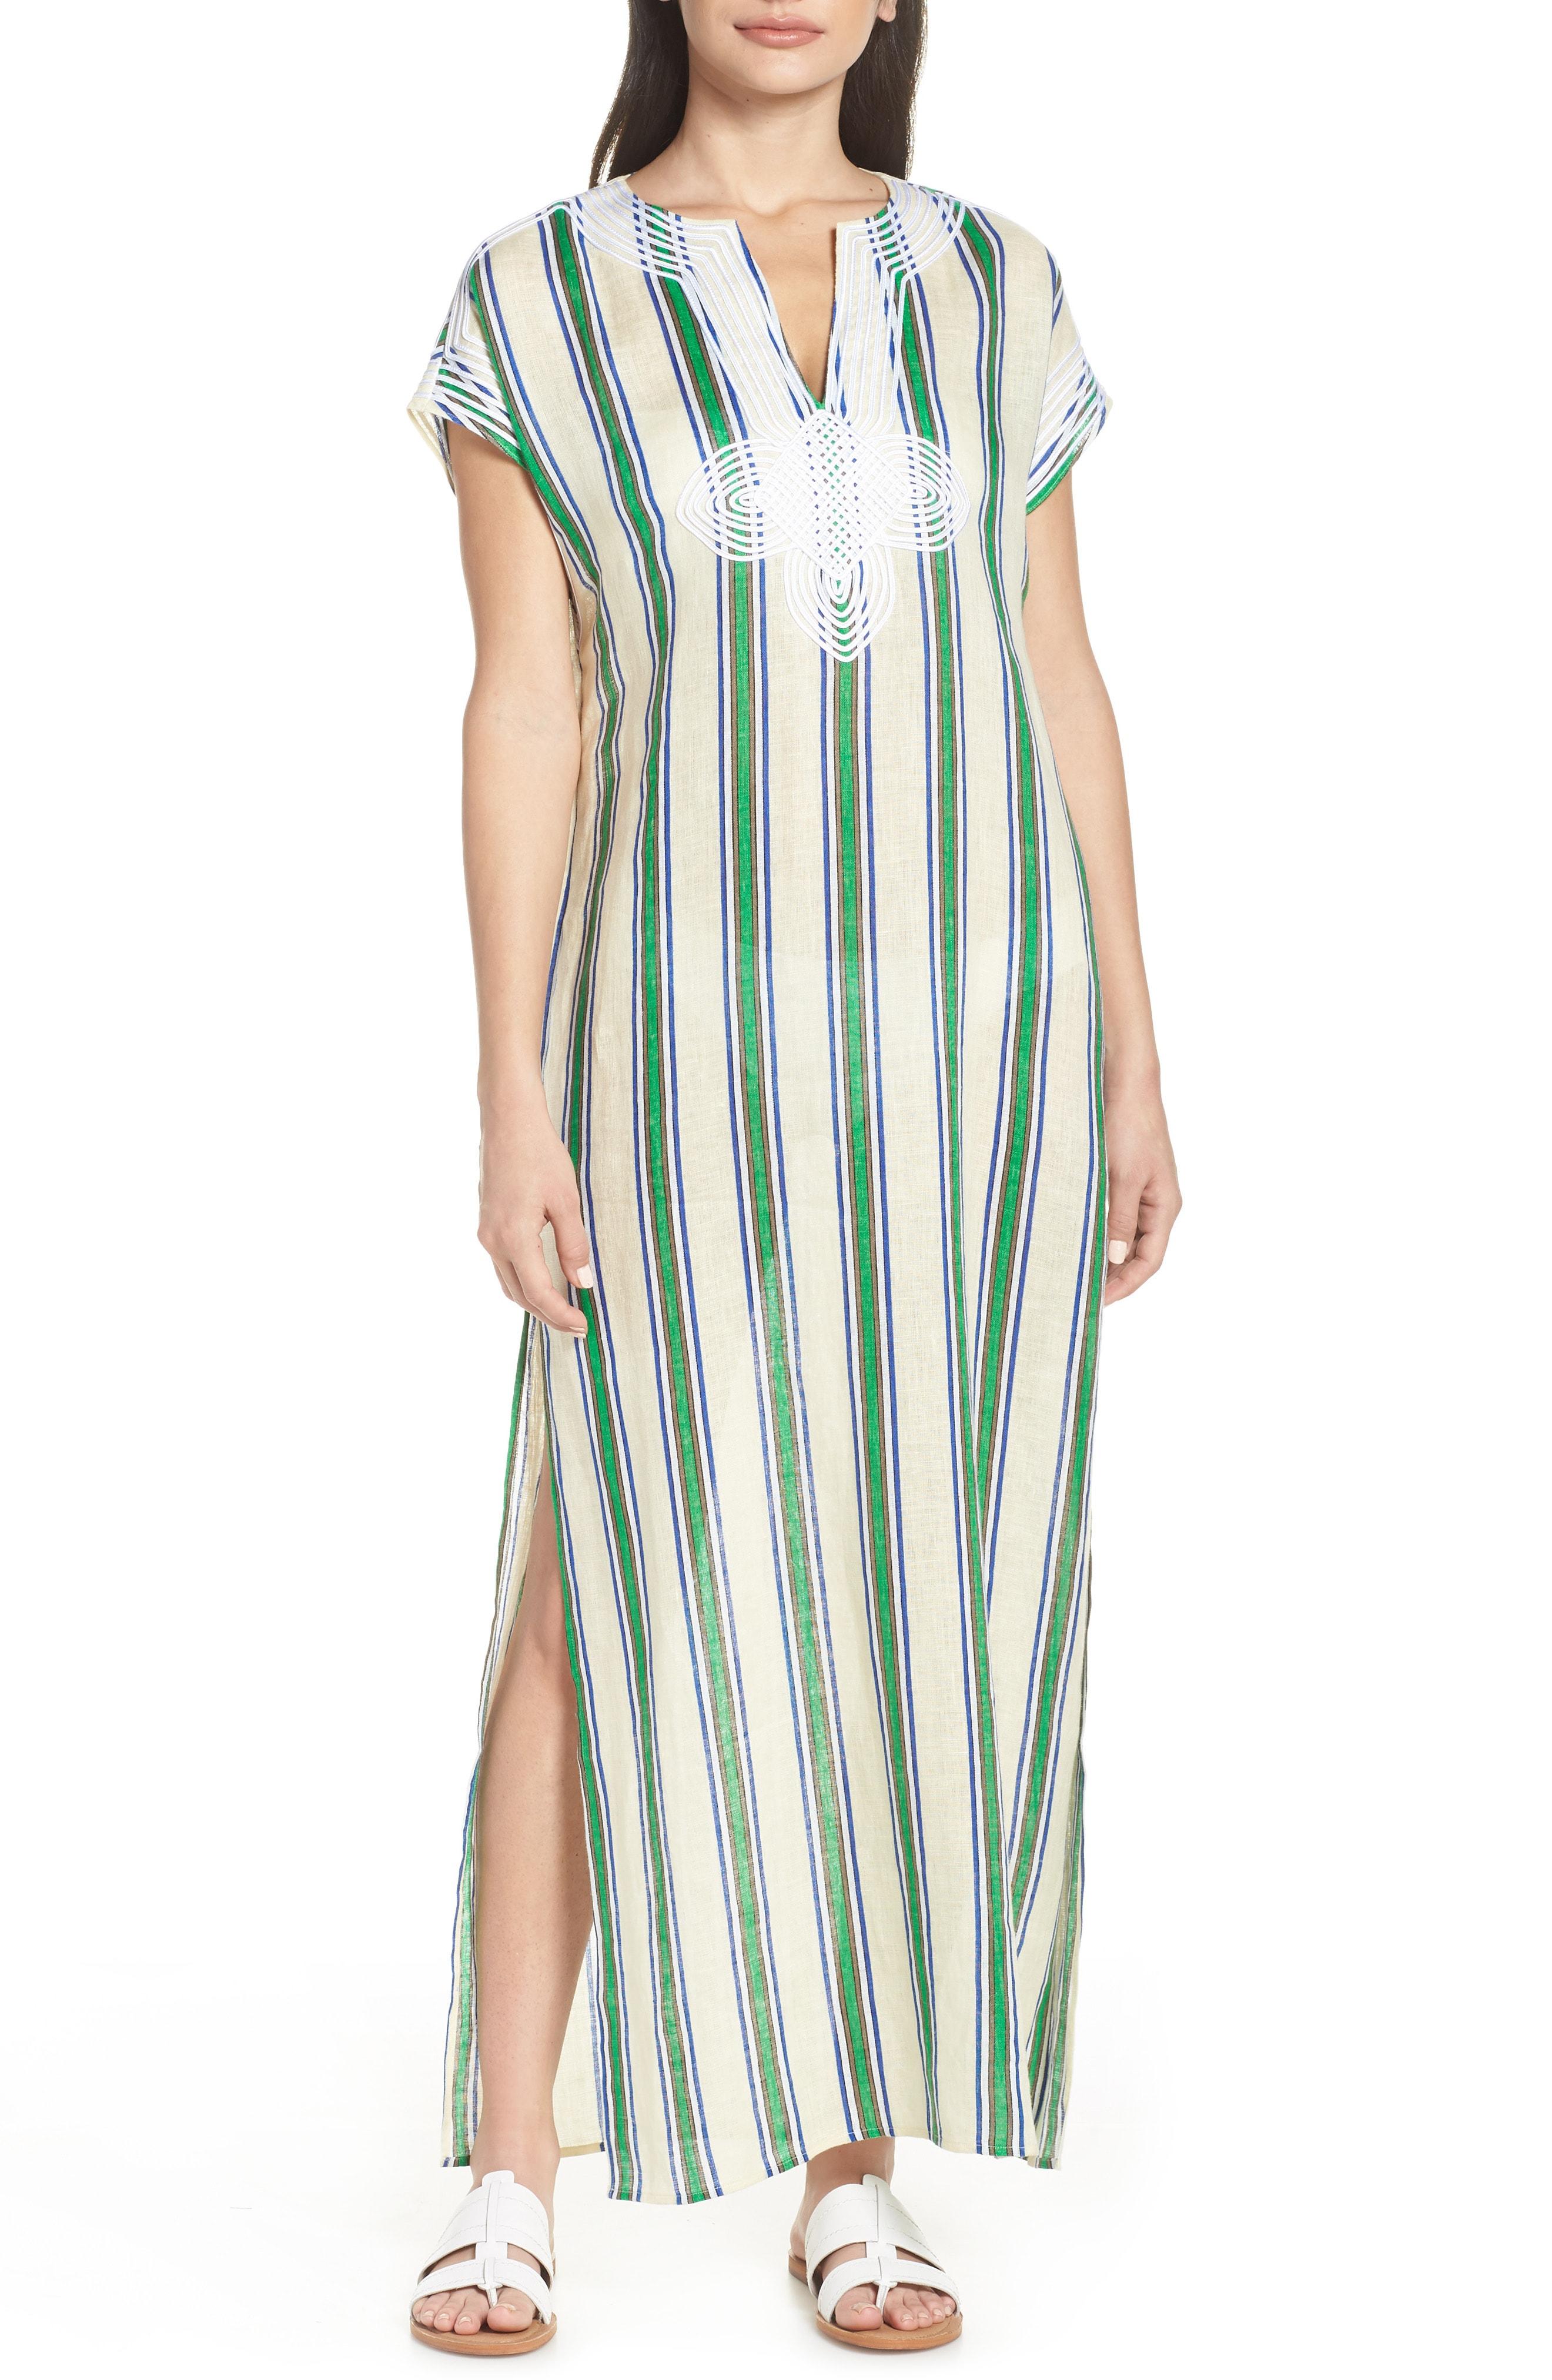 Lyst - Tory Burch Awning Stripe Cover-up Caftan in Blue - Save 8%